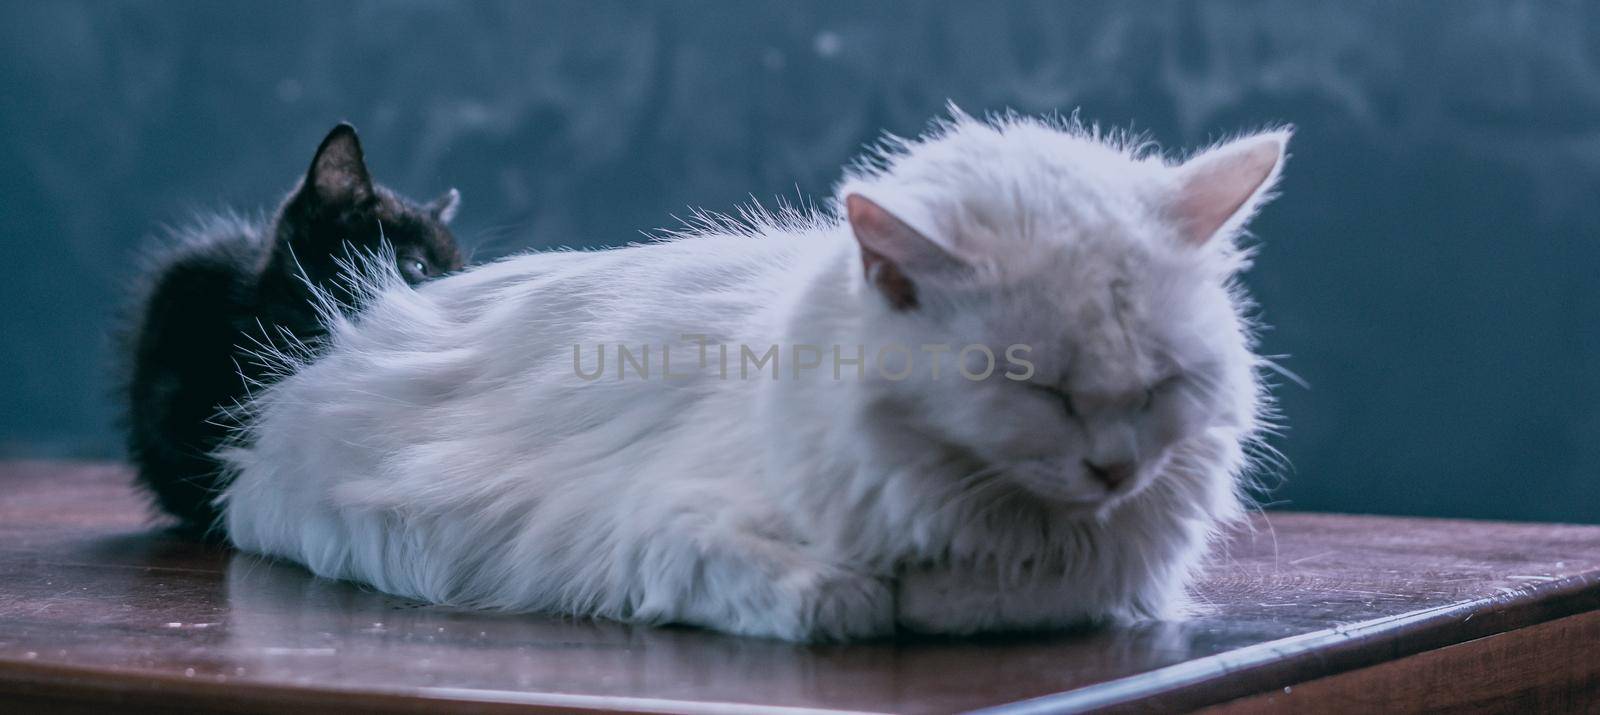 BANNER photo white fluffy long hair cat lie sleeping close eyes. Black kitten hide background. Animals care, friendship, relationship problems, sad calm mood rest time home sweetness kindness evening by nandrey85